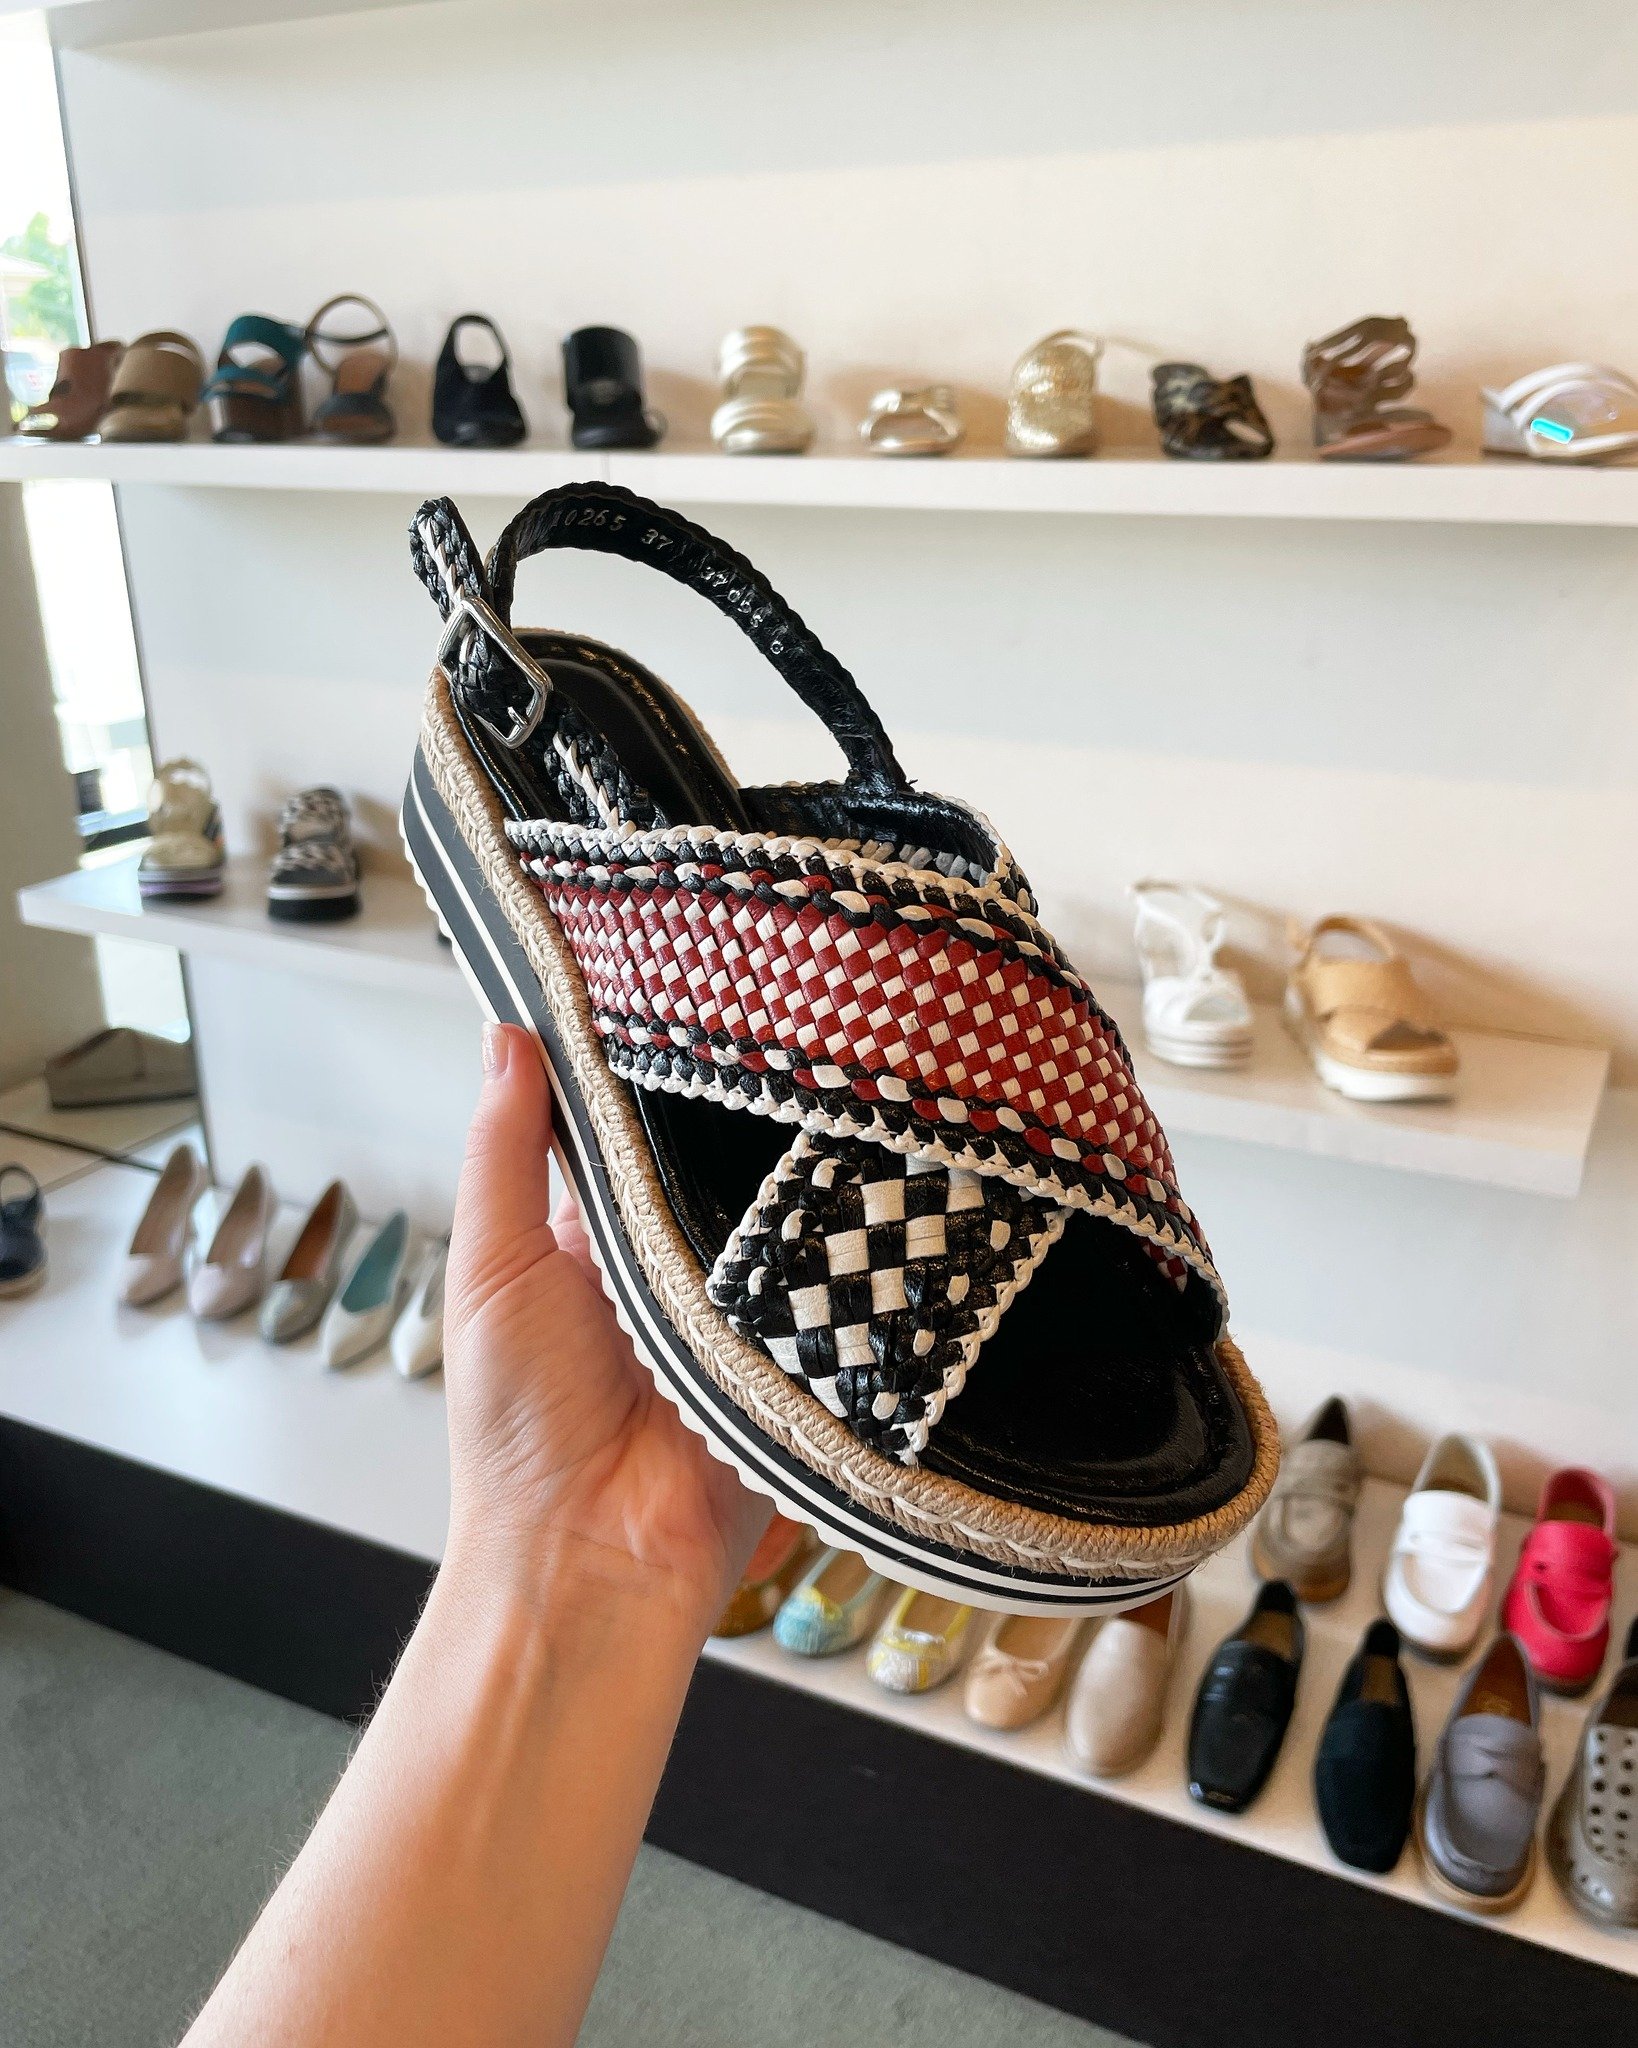 The Milan by Pons Quintana - made in Menorca, Spain with hand-braided jute and leather detailing. Going fast - shop now at Deborah Kent's in South Tampa.

#deborahkents #southtampa #tampashopping #ponsquintana #leathersandals #braidedleather #platfor